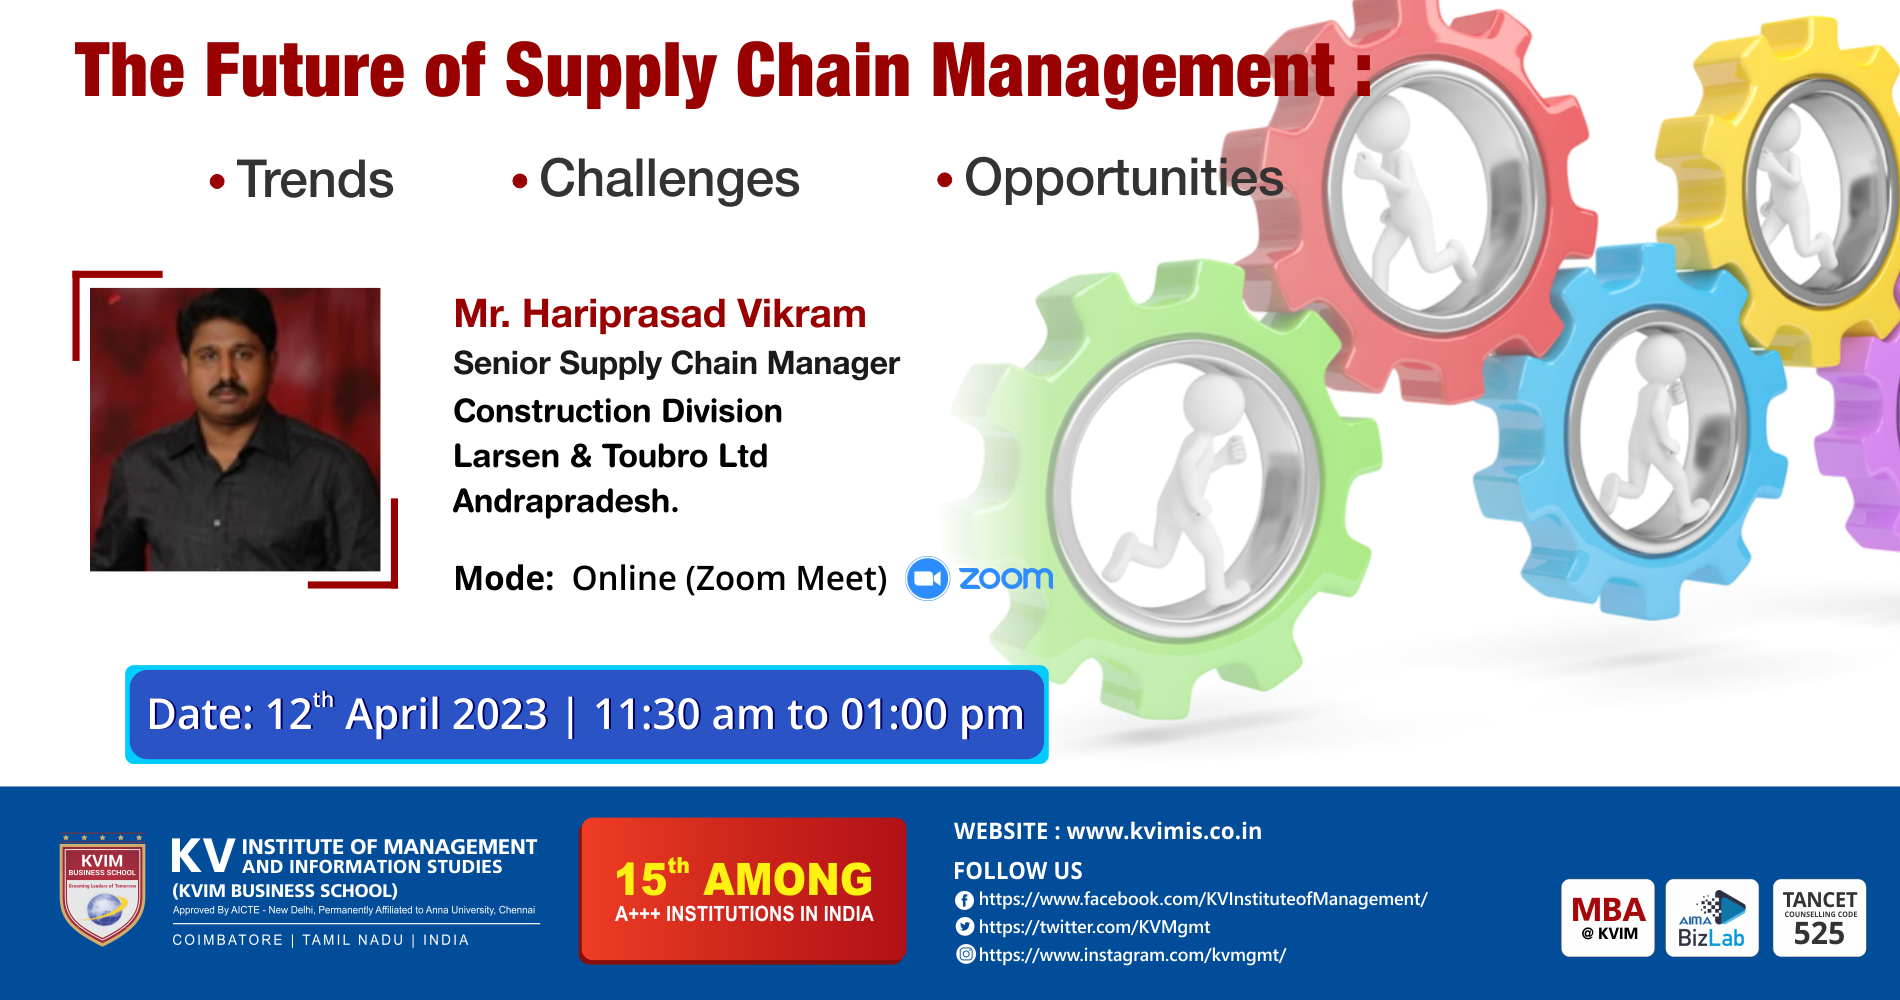 " The Future of Supply Chain Management: Trends, Challenges, and Opportunities."